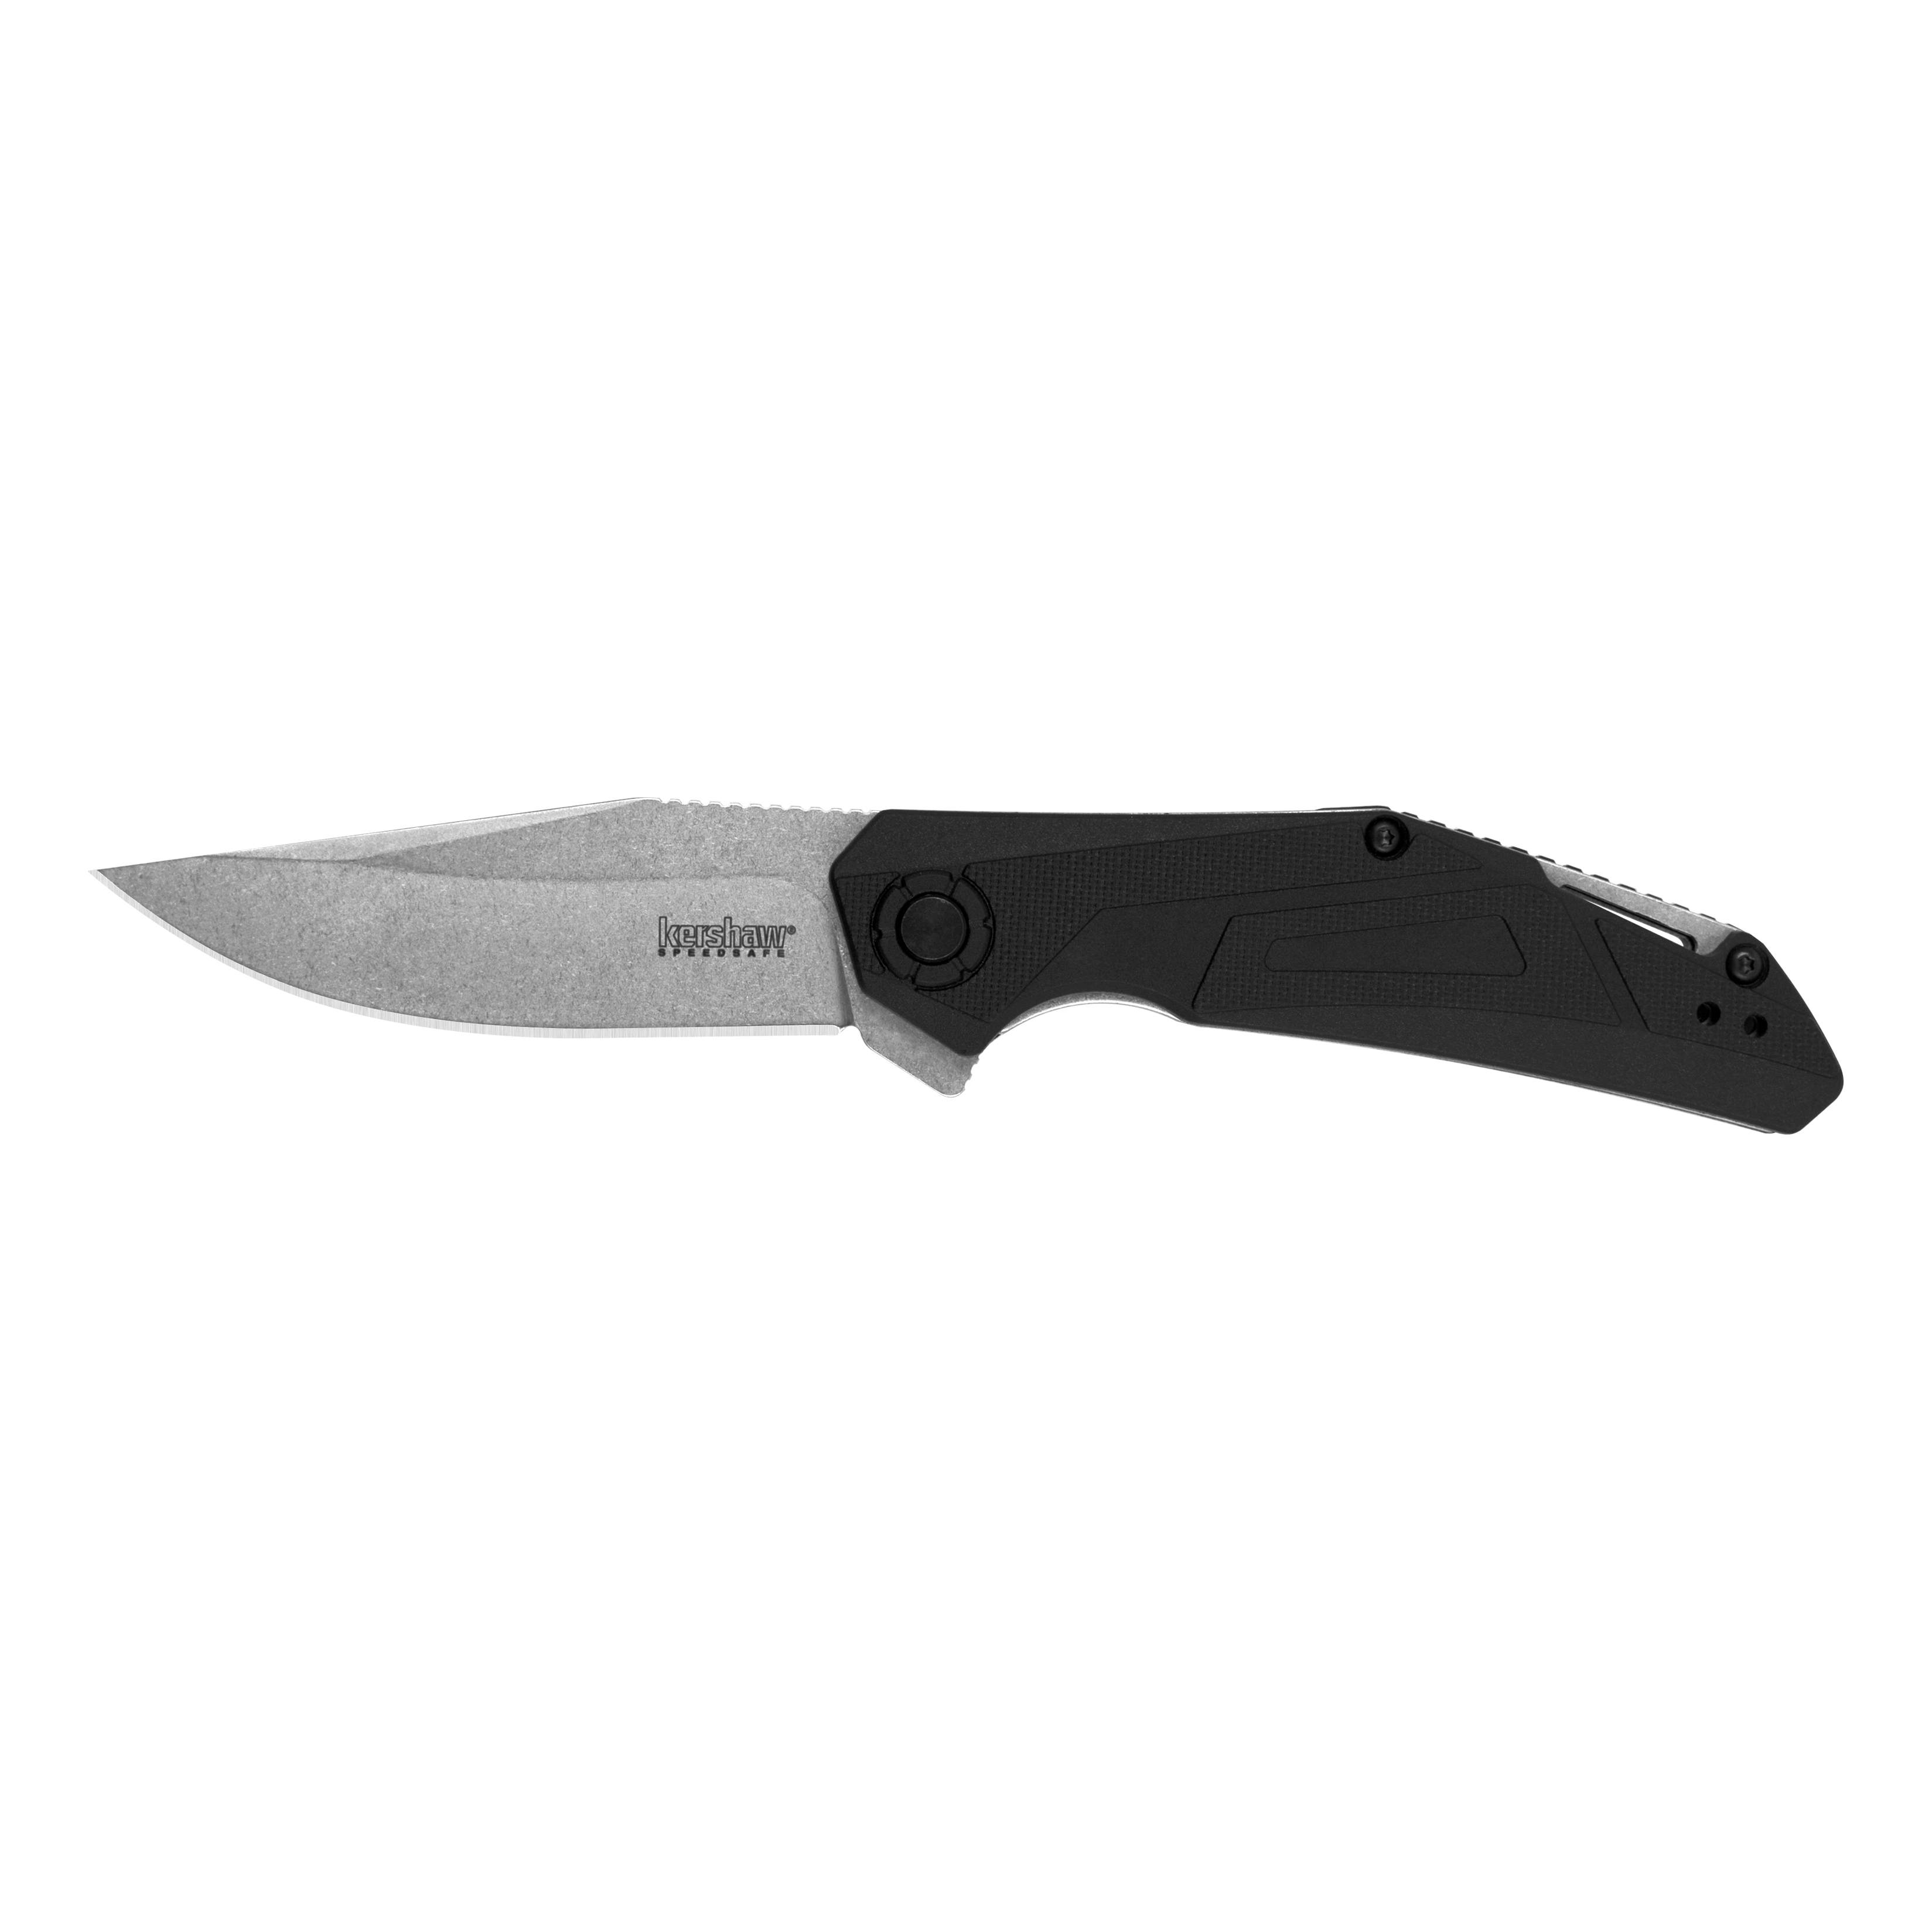 Kershaw® Camshaft 1370 3" Assisted Open Knife